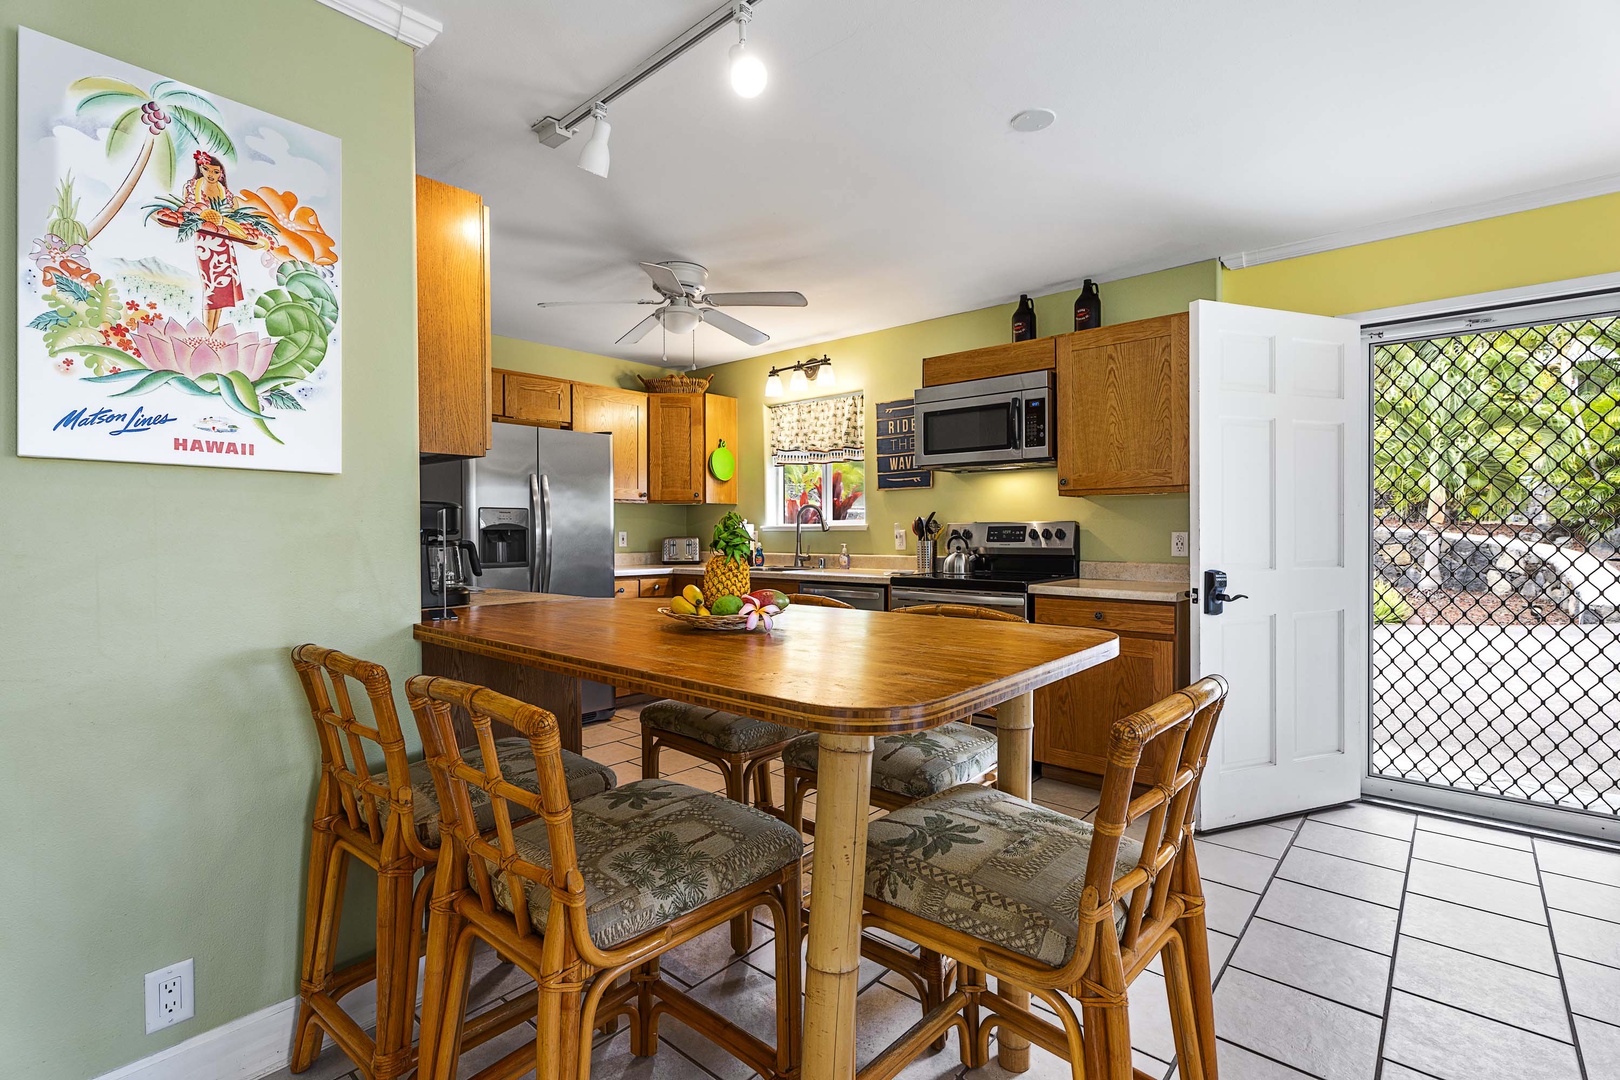 Kailua Kona Vacation Rentals, Hale A Kai - Kitchen offers seating for 5!